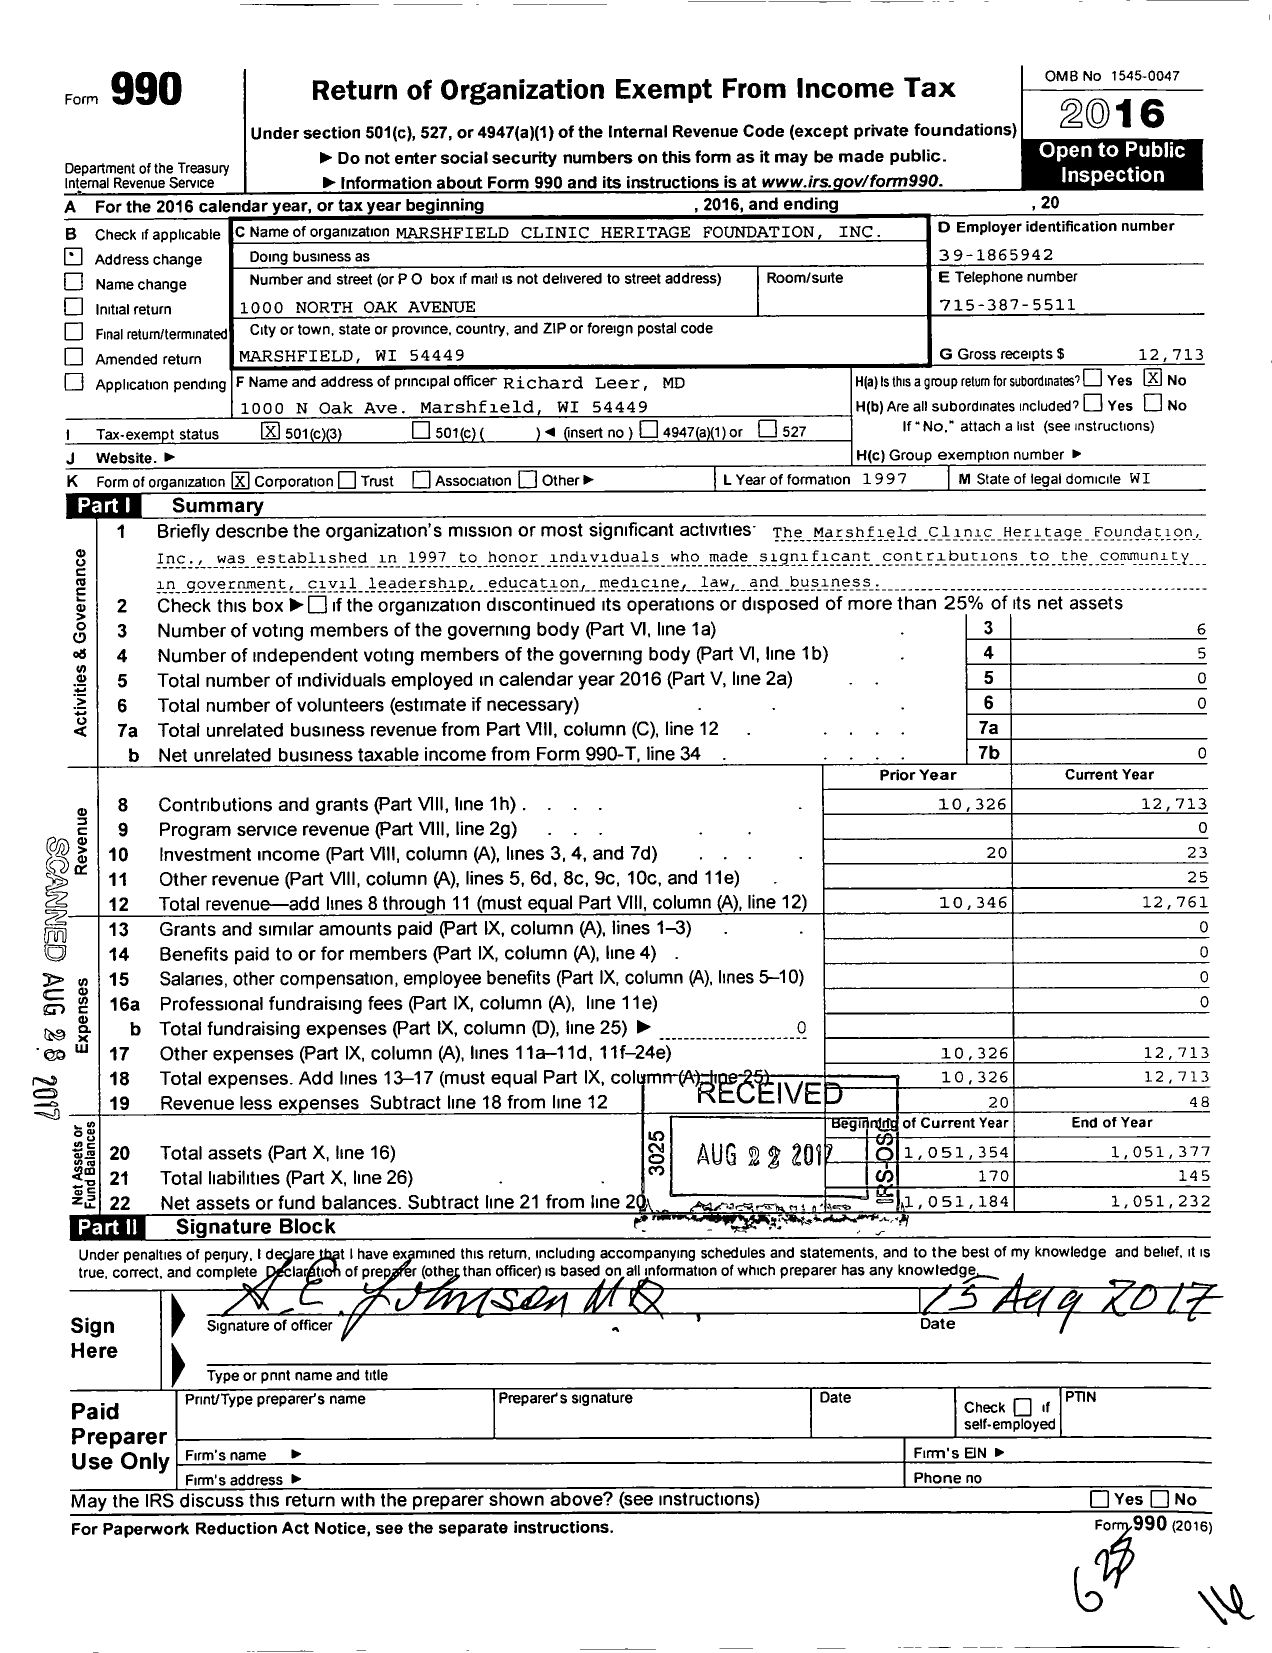 Image of first page of 2016 Form 990 for Marshfield Clinic Heritage Foundation